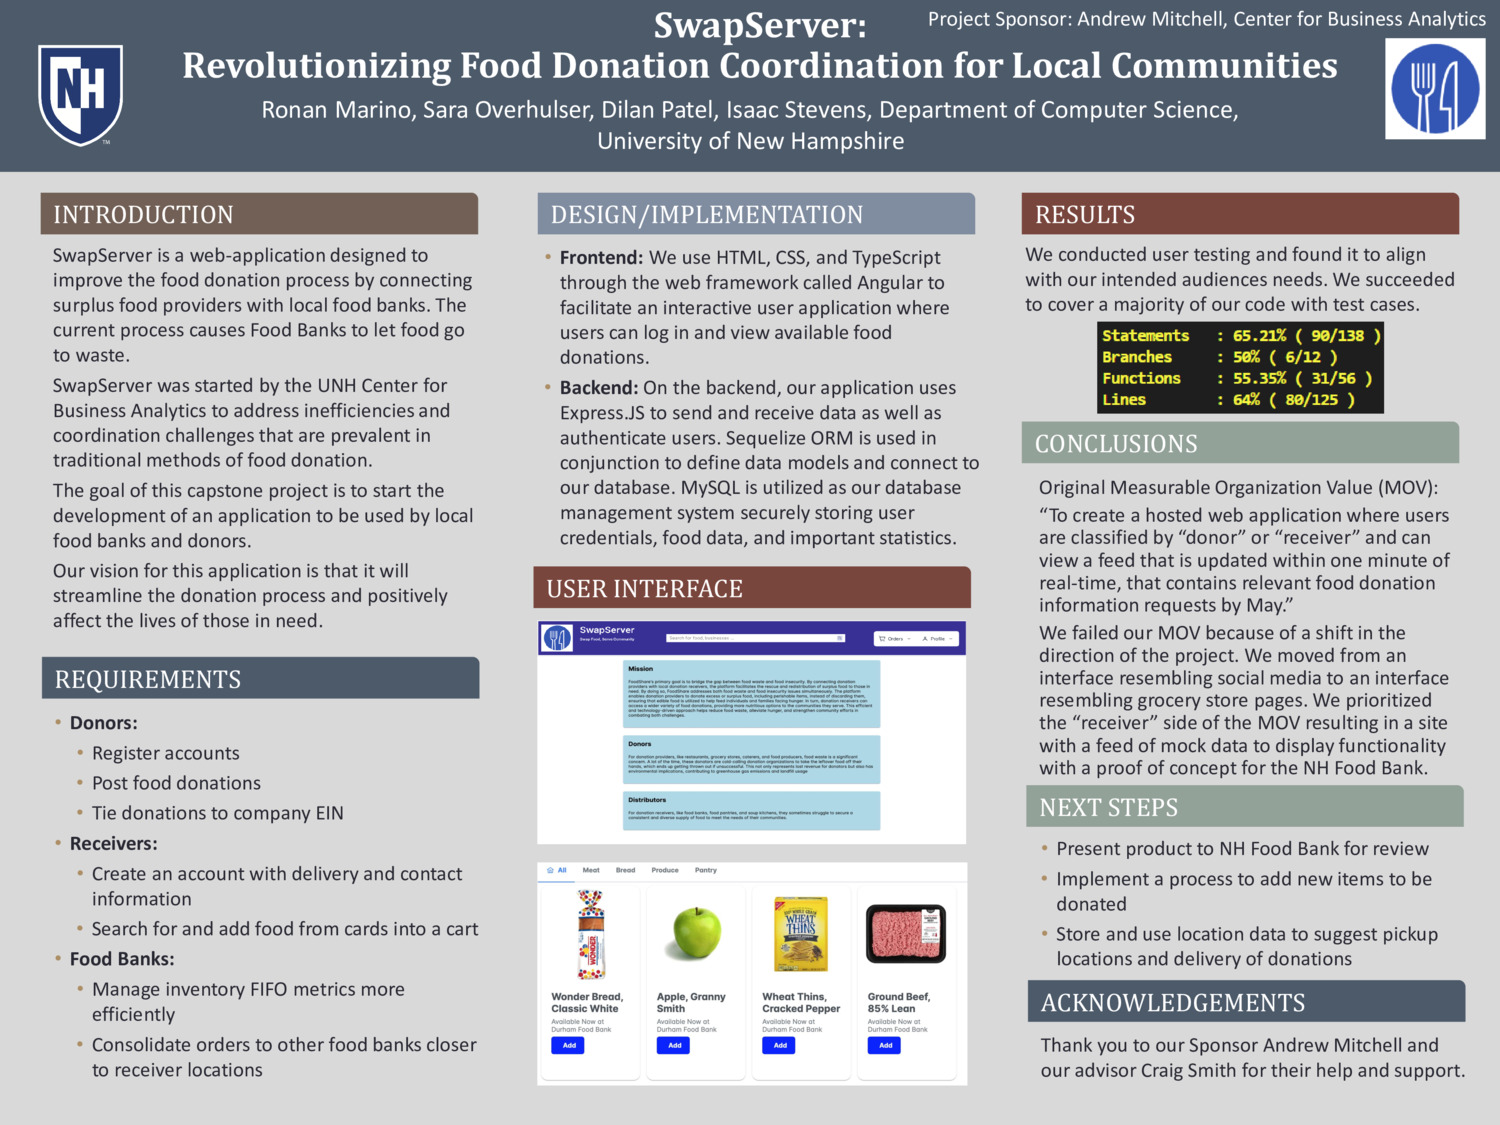 Swapserver: Revolutionizing Food Donation Coordination For Local Communities by rmm1111